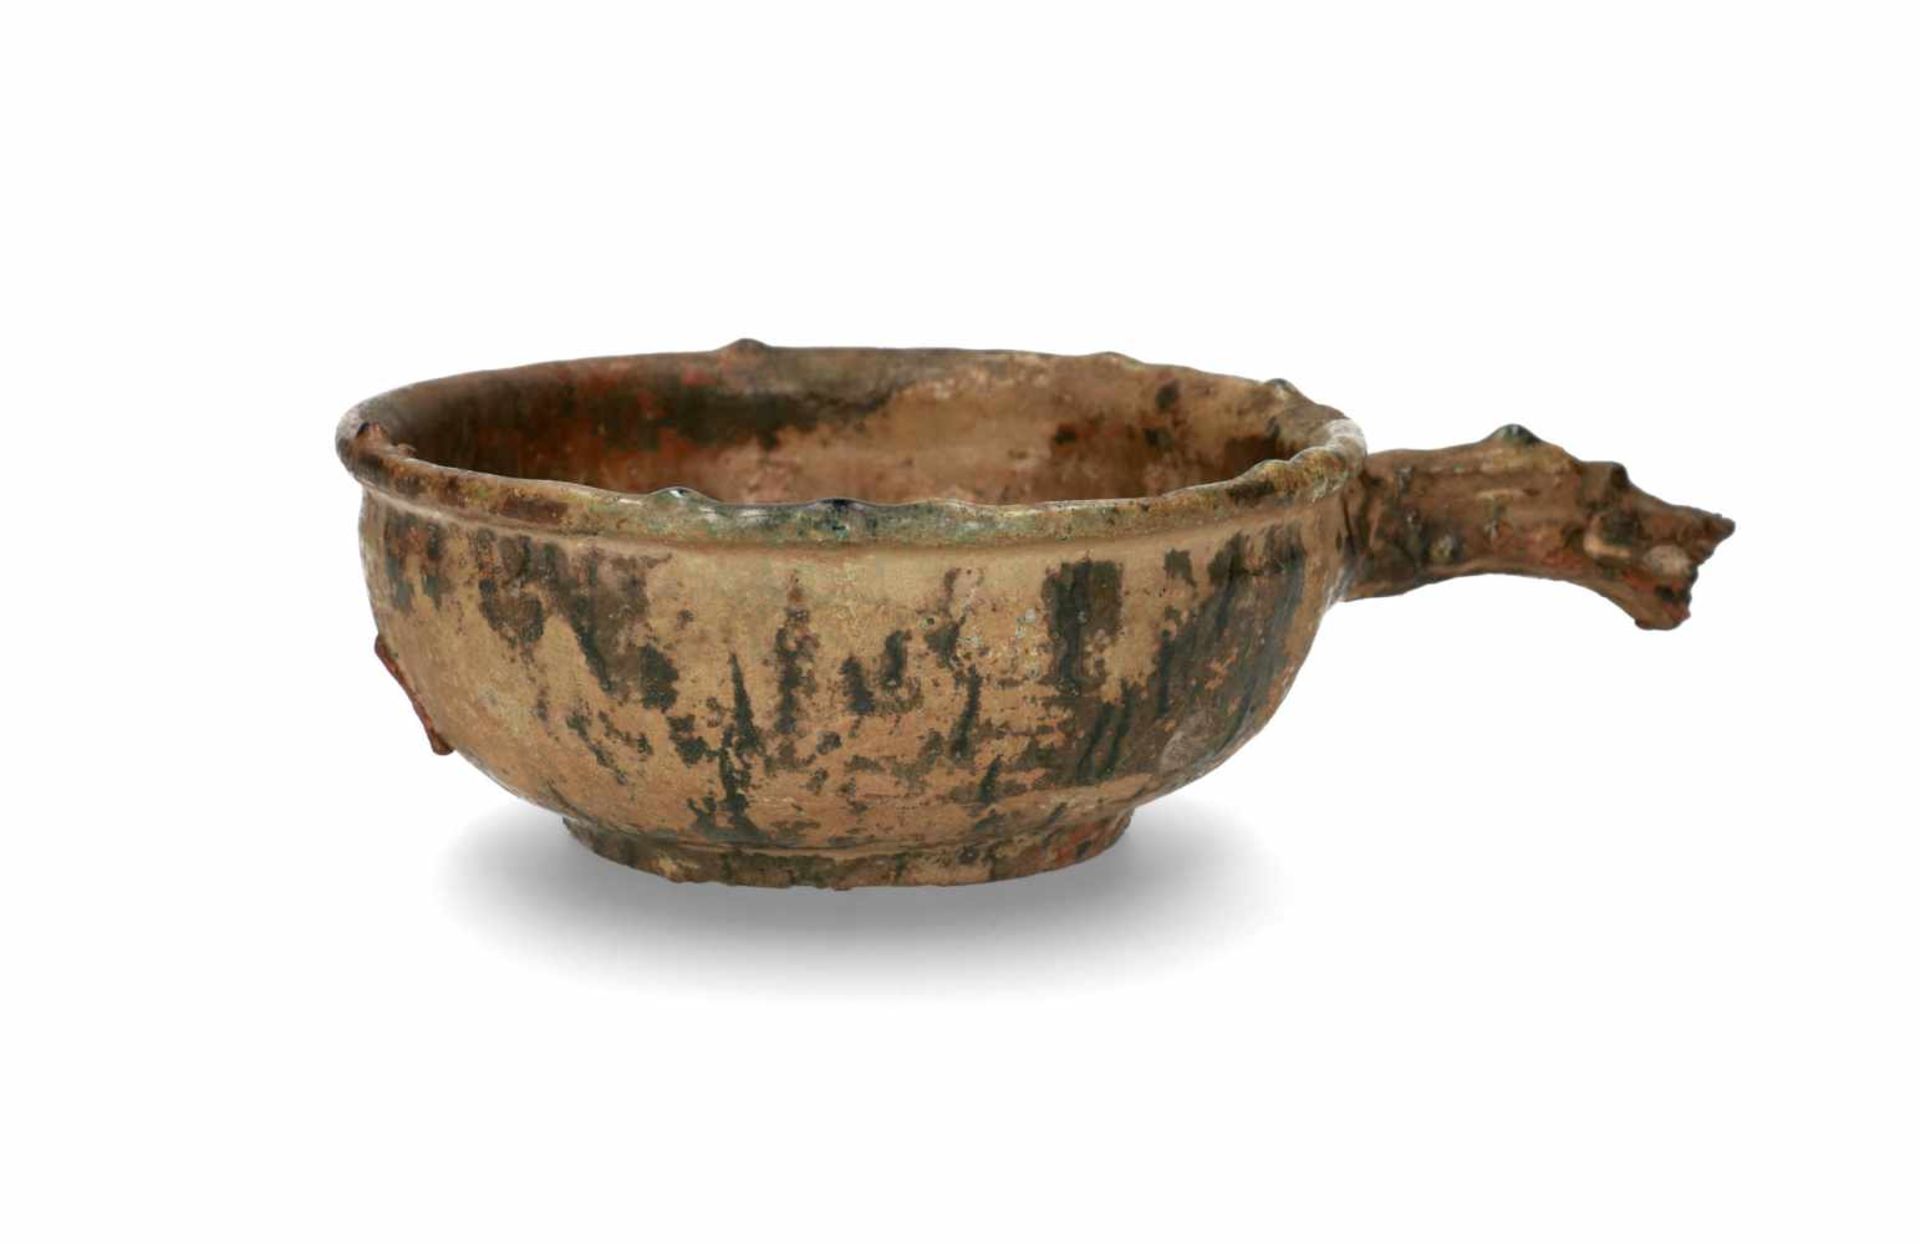 A green glazed ceramic bowl with dragon handle. Groove decorated wall. The dragon head with detailed